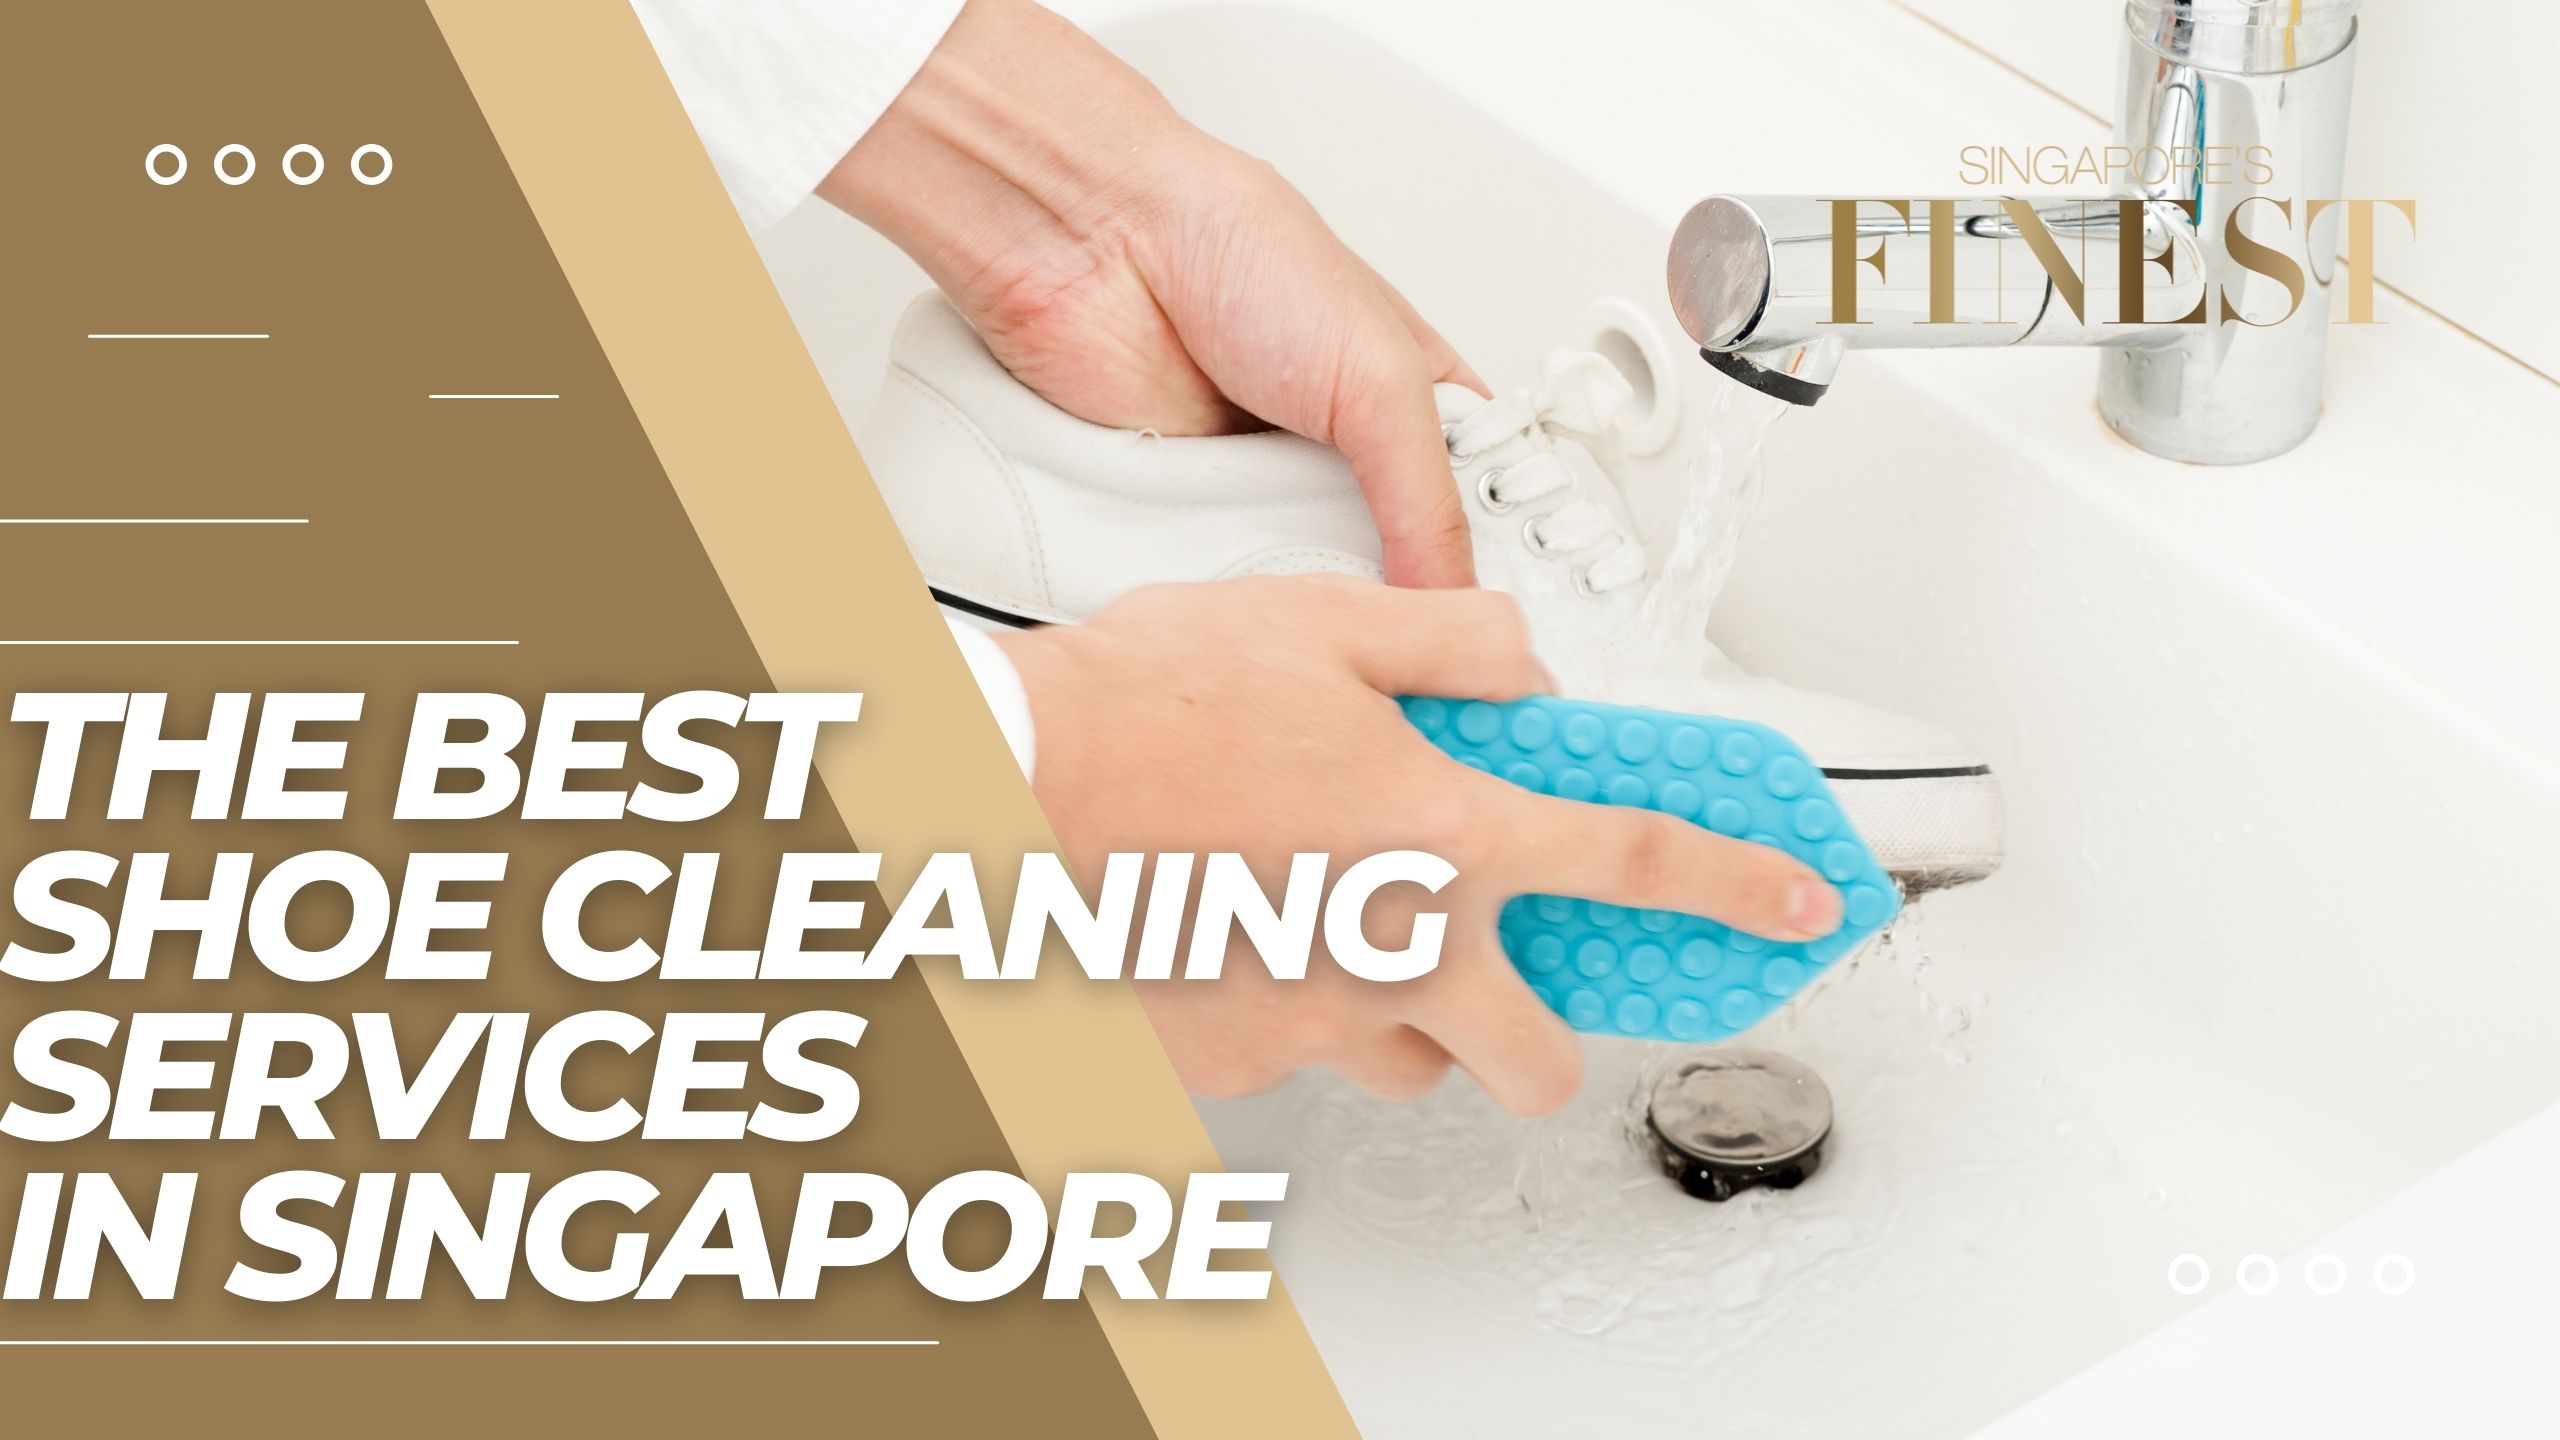 The Finest Shoe Cleaning Services in Singapore